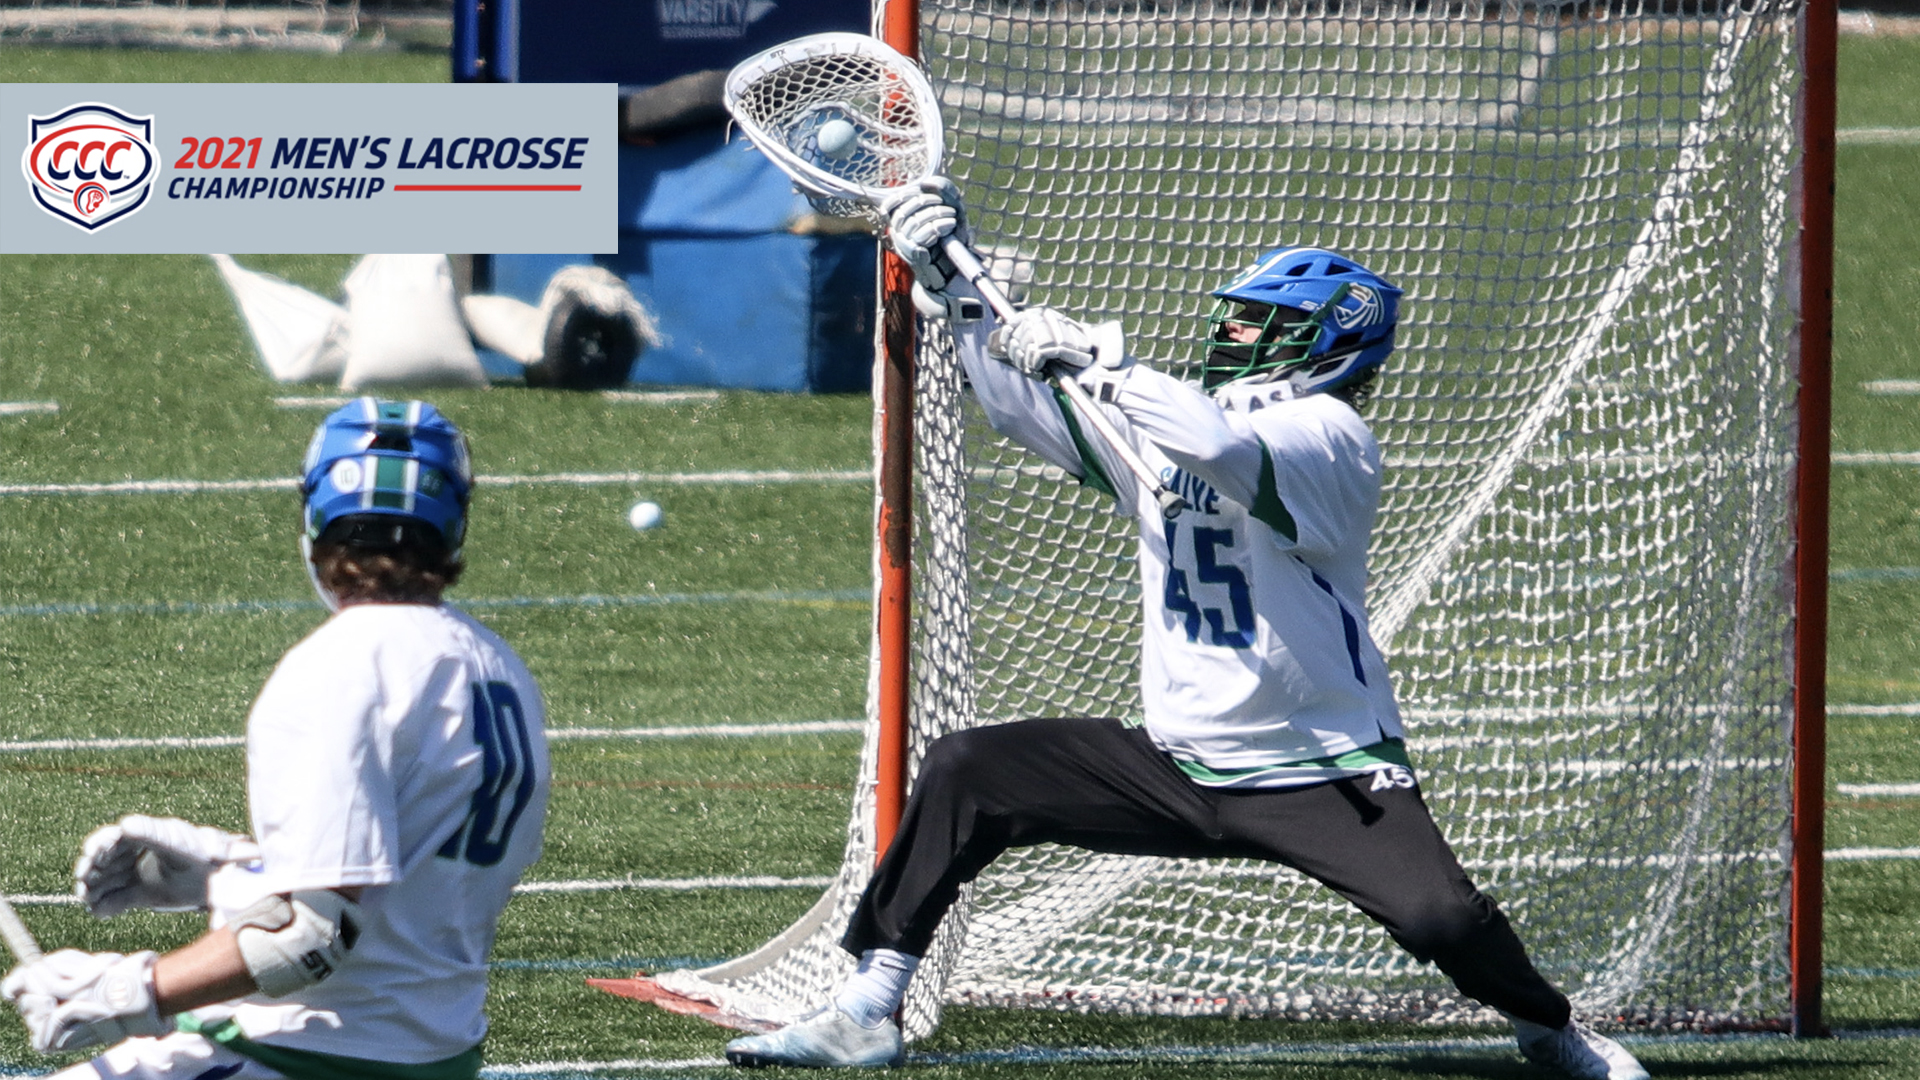 Senior goalie Connor Cunningham and the Seahawks will face the Golden Bears in the CCC semifinals.